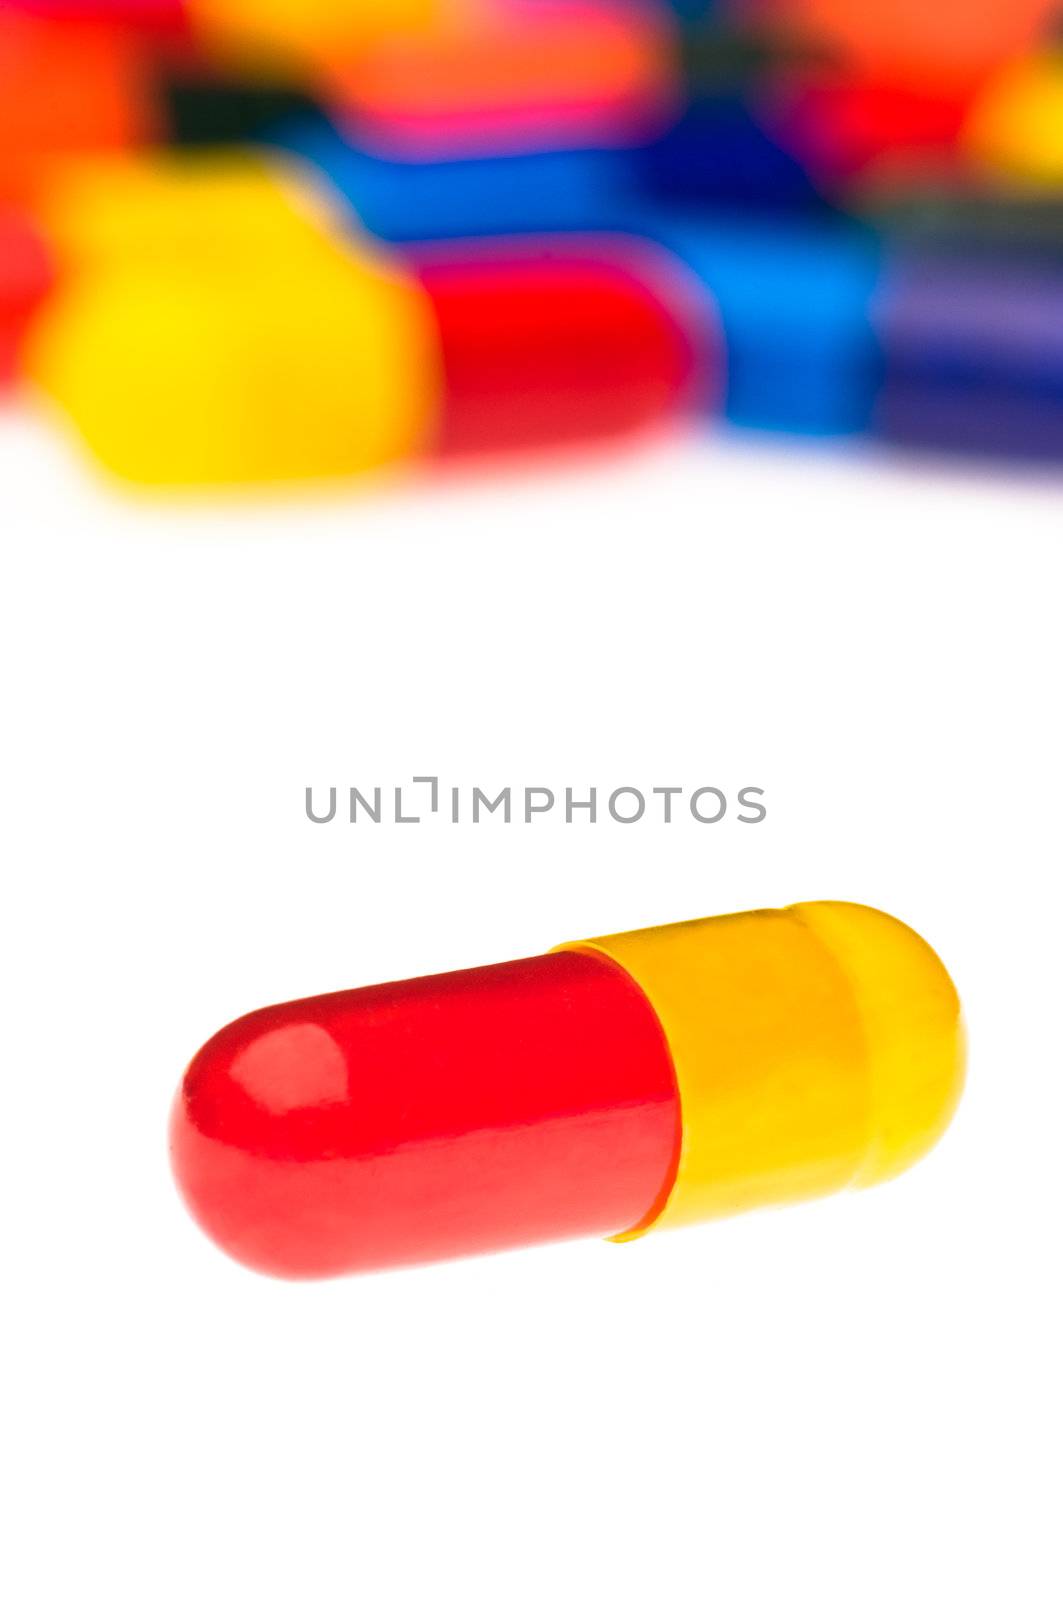 One red yellow capsule in front of many colorful, blurry in the background